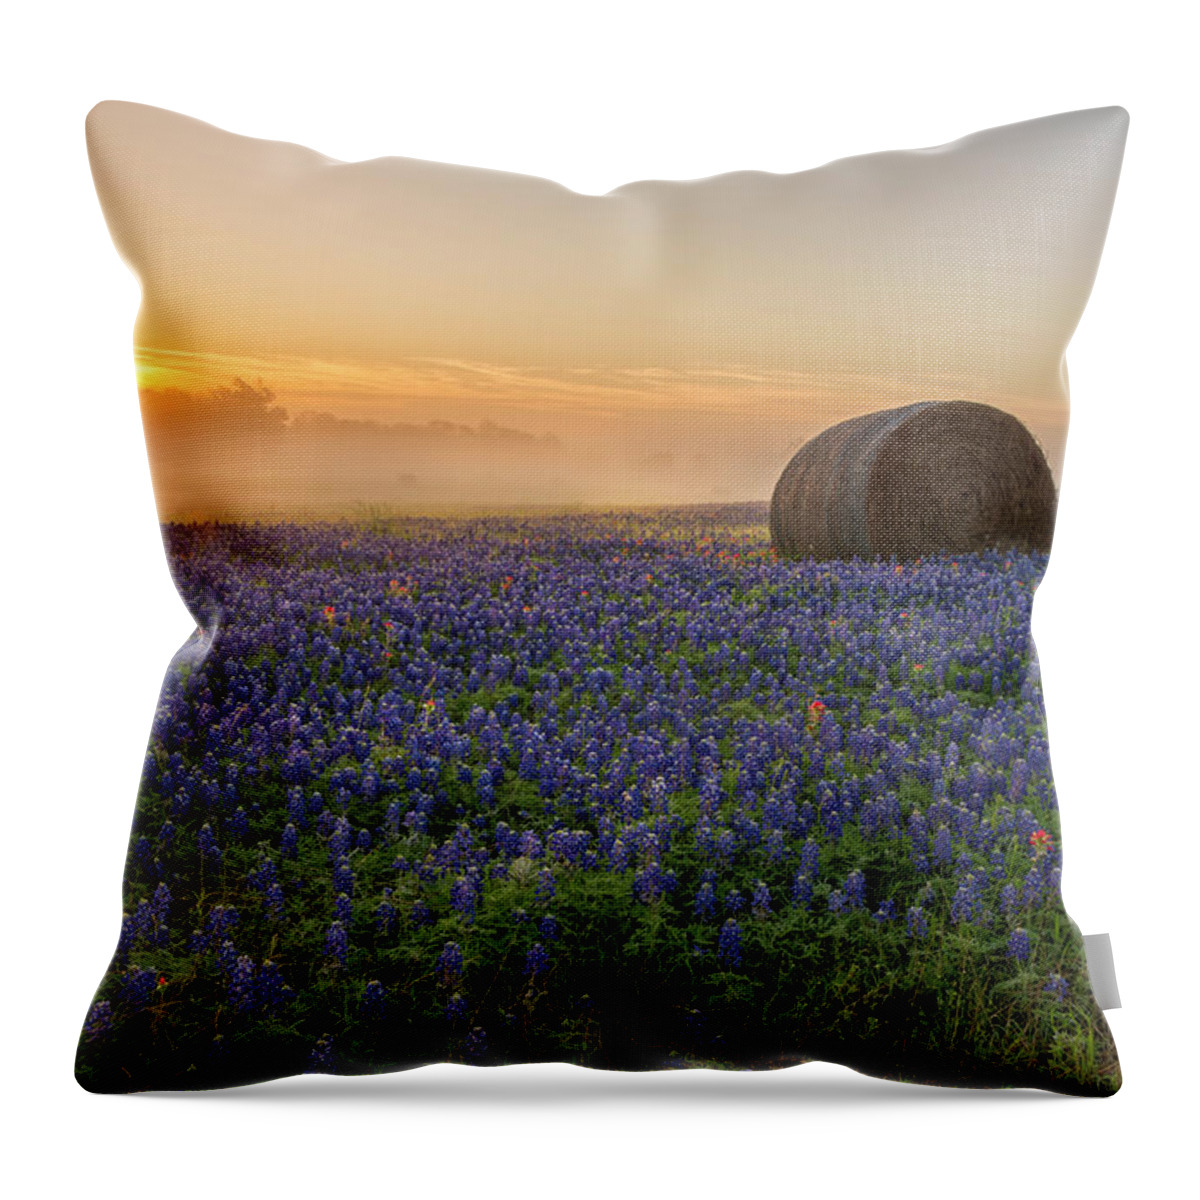 Bluebonnet Throw Pillow featuring the photograph Foggy Bluebonnet Sunrise - Independence Texas by Brian Harig